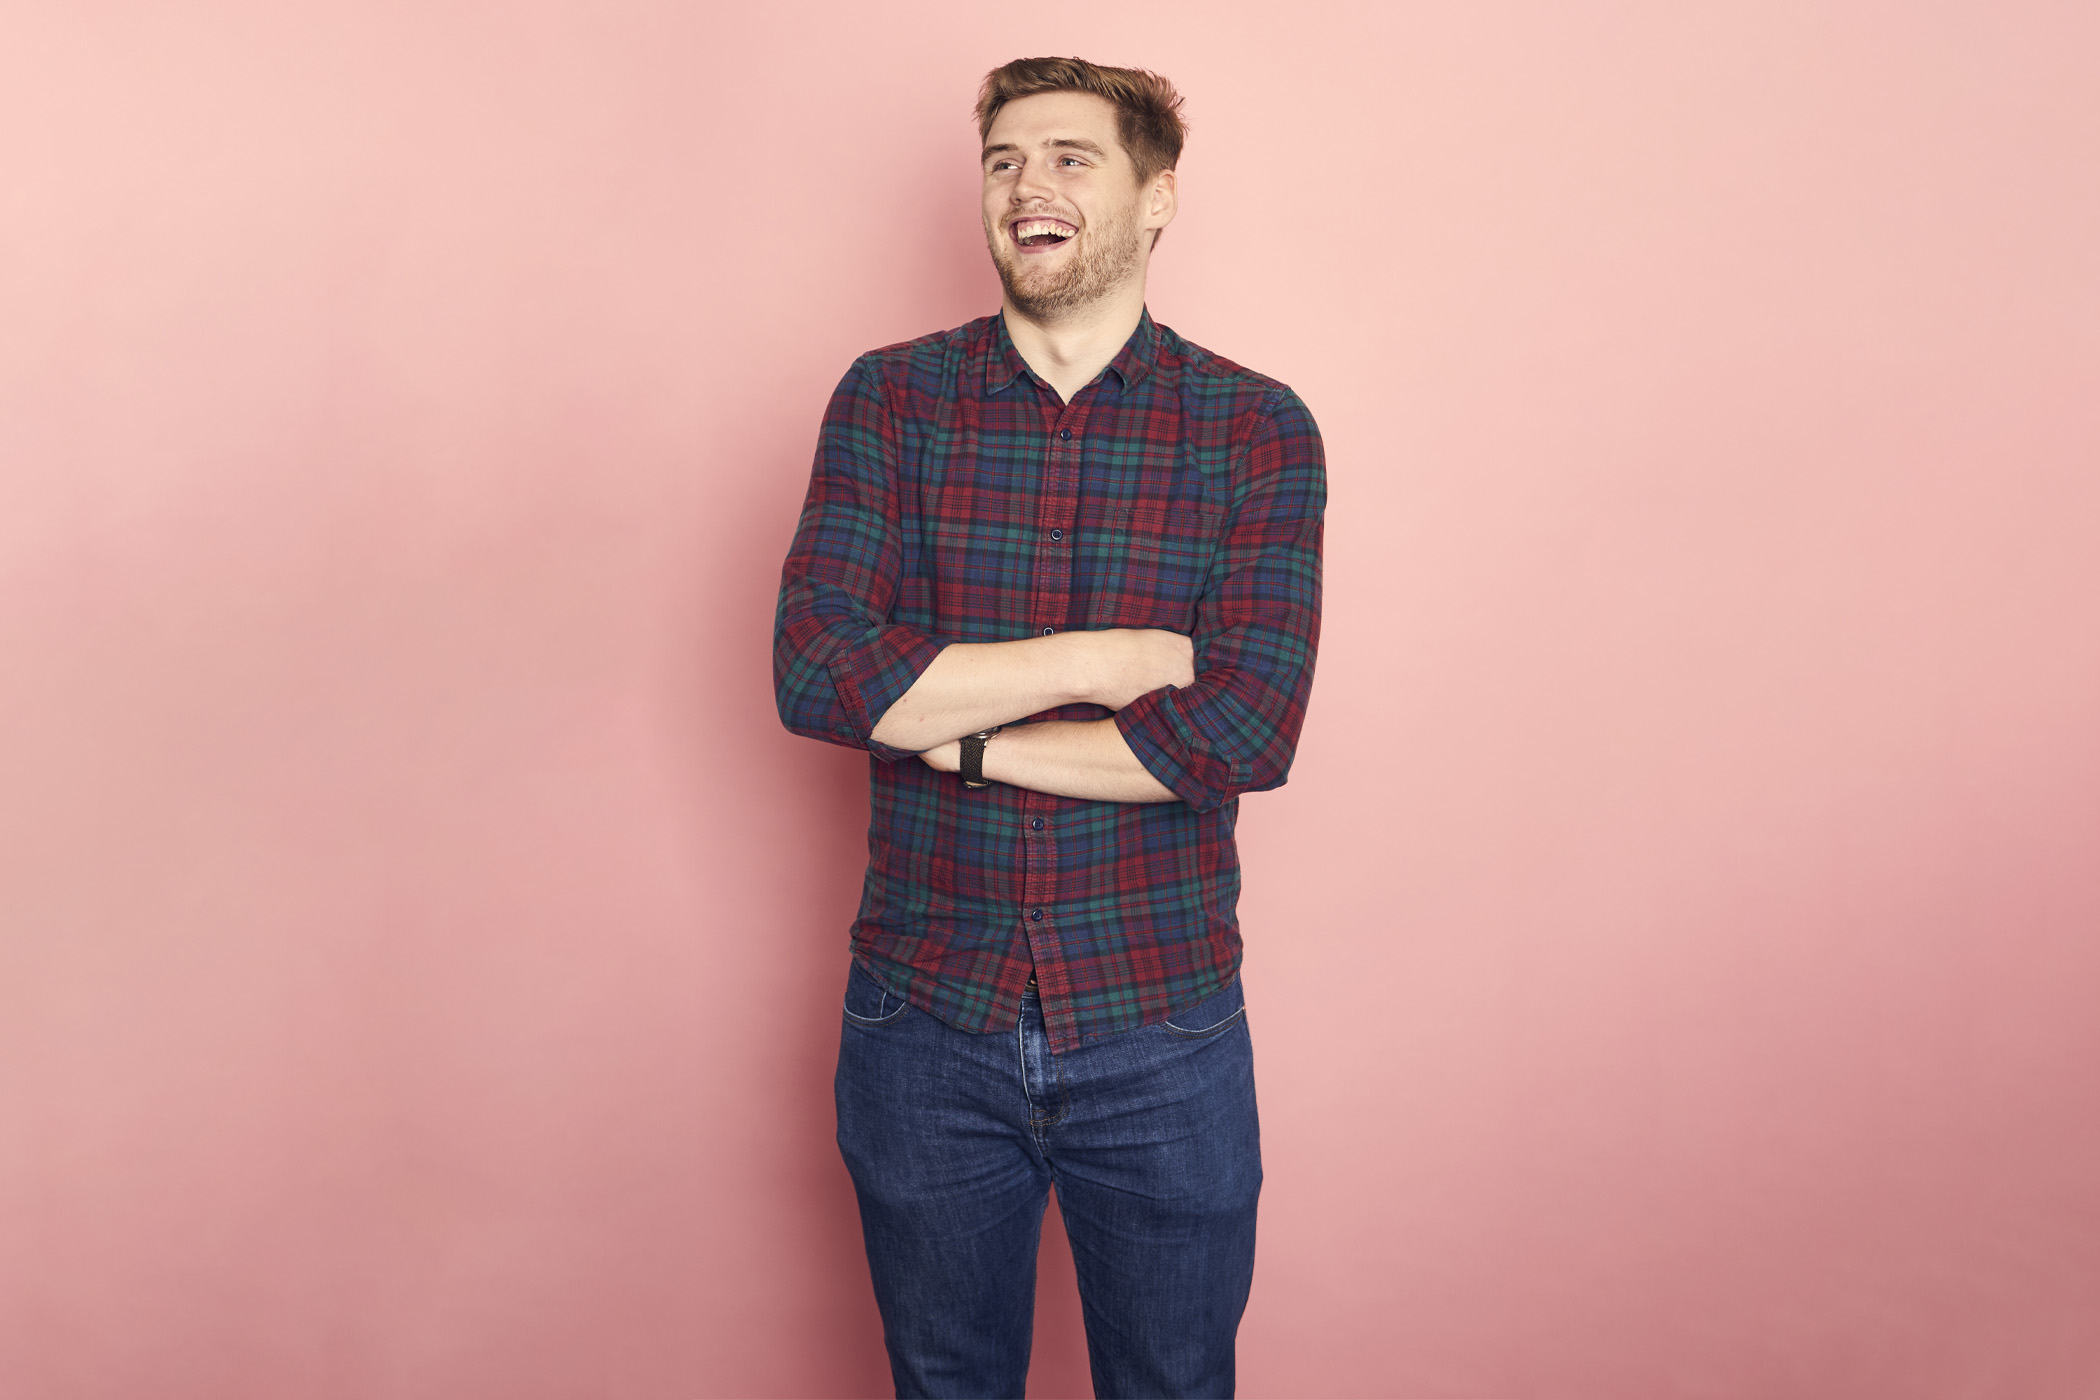 An Abertay Student on a pink coloured background